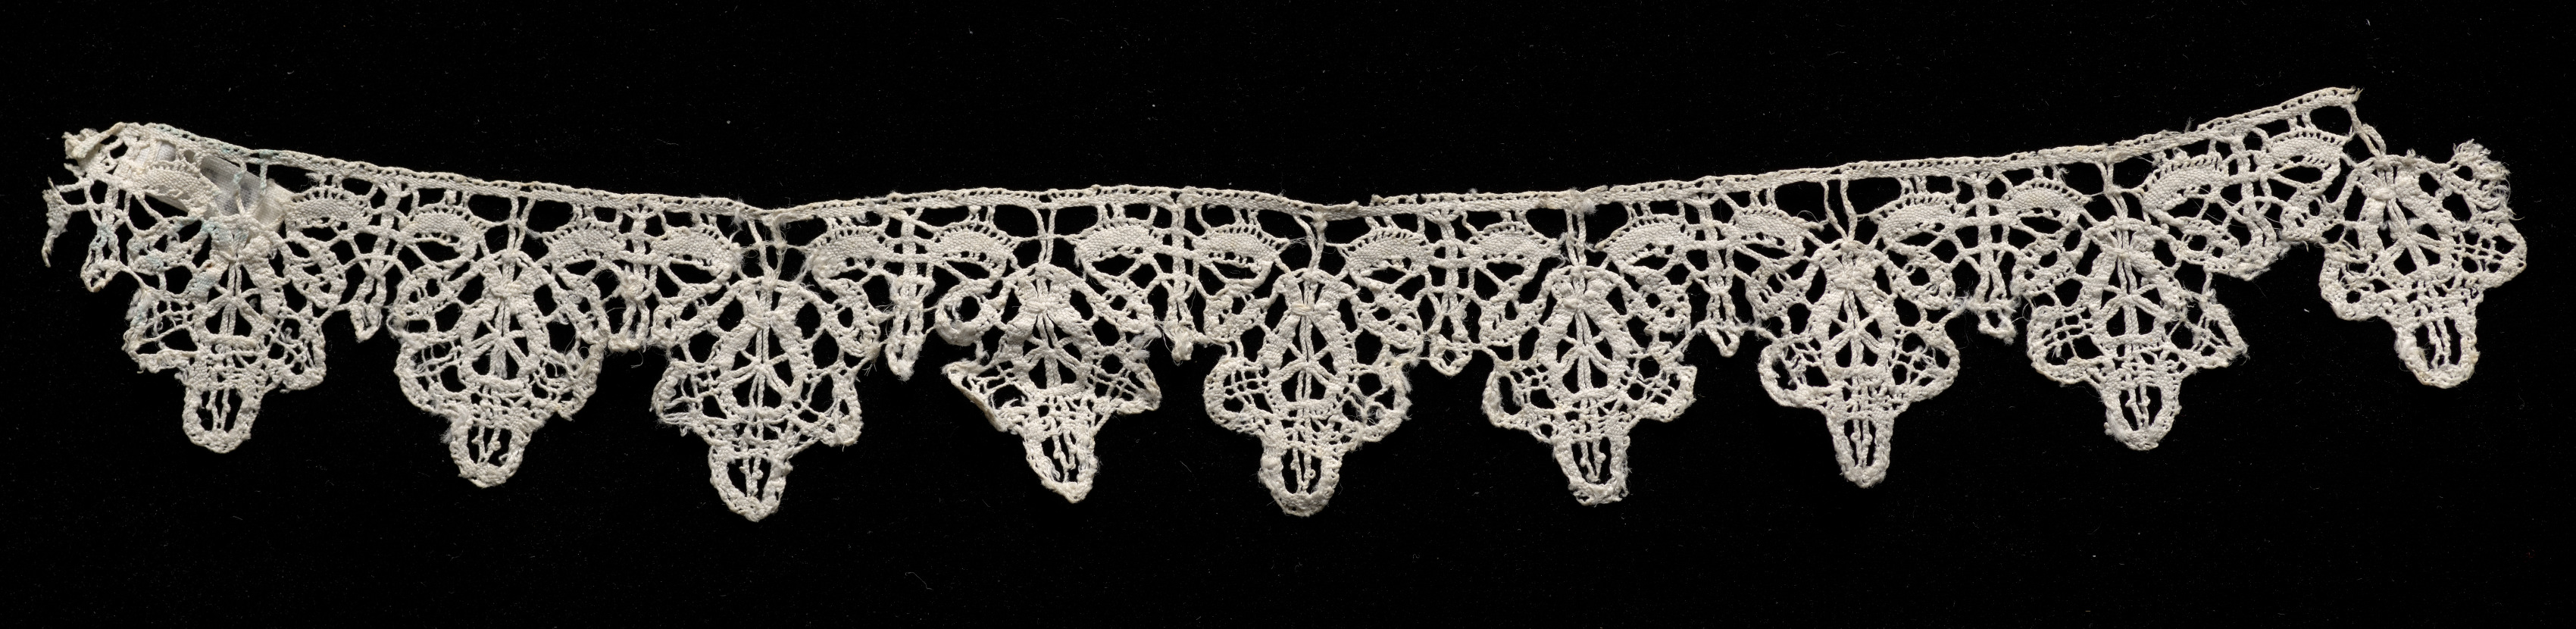 Bobbin Lace (Rose Lace) Edging with Points